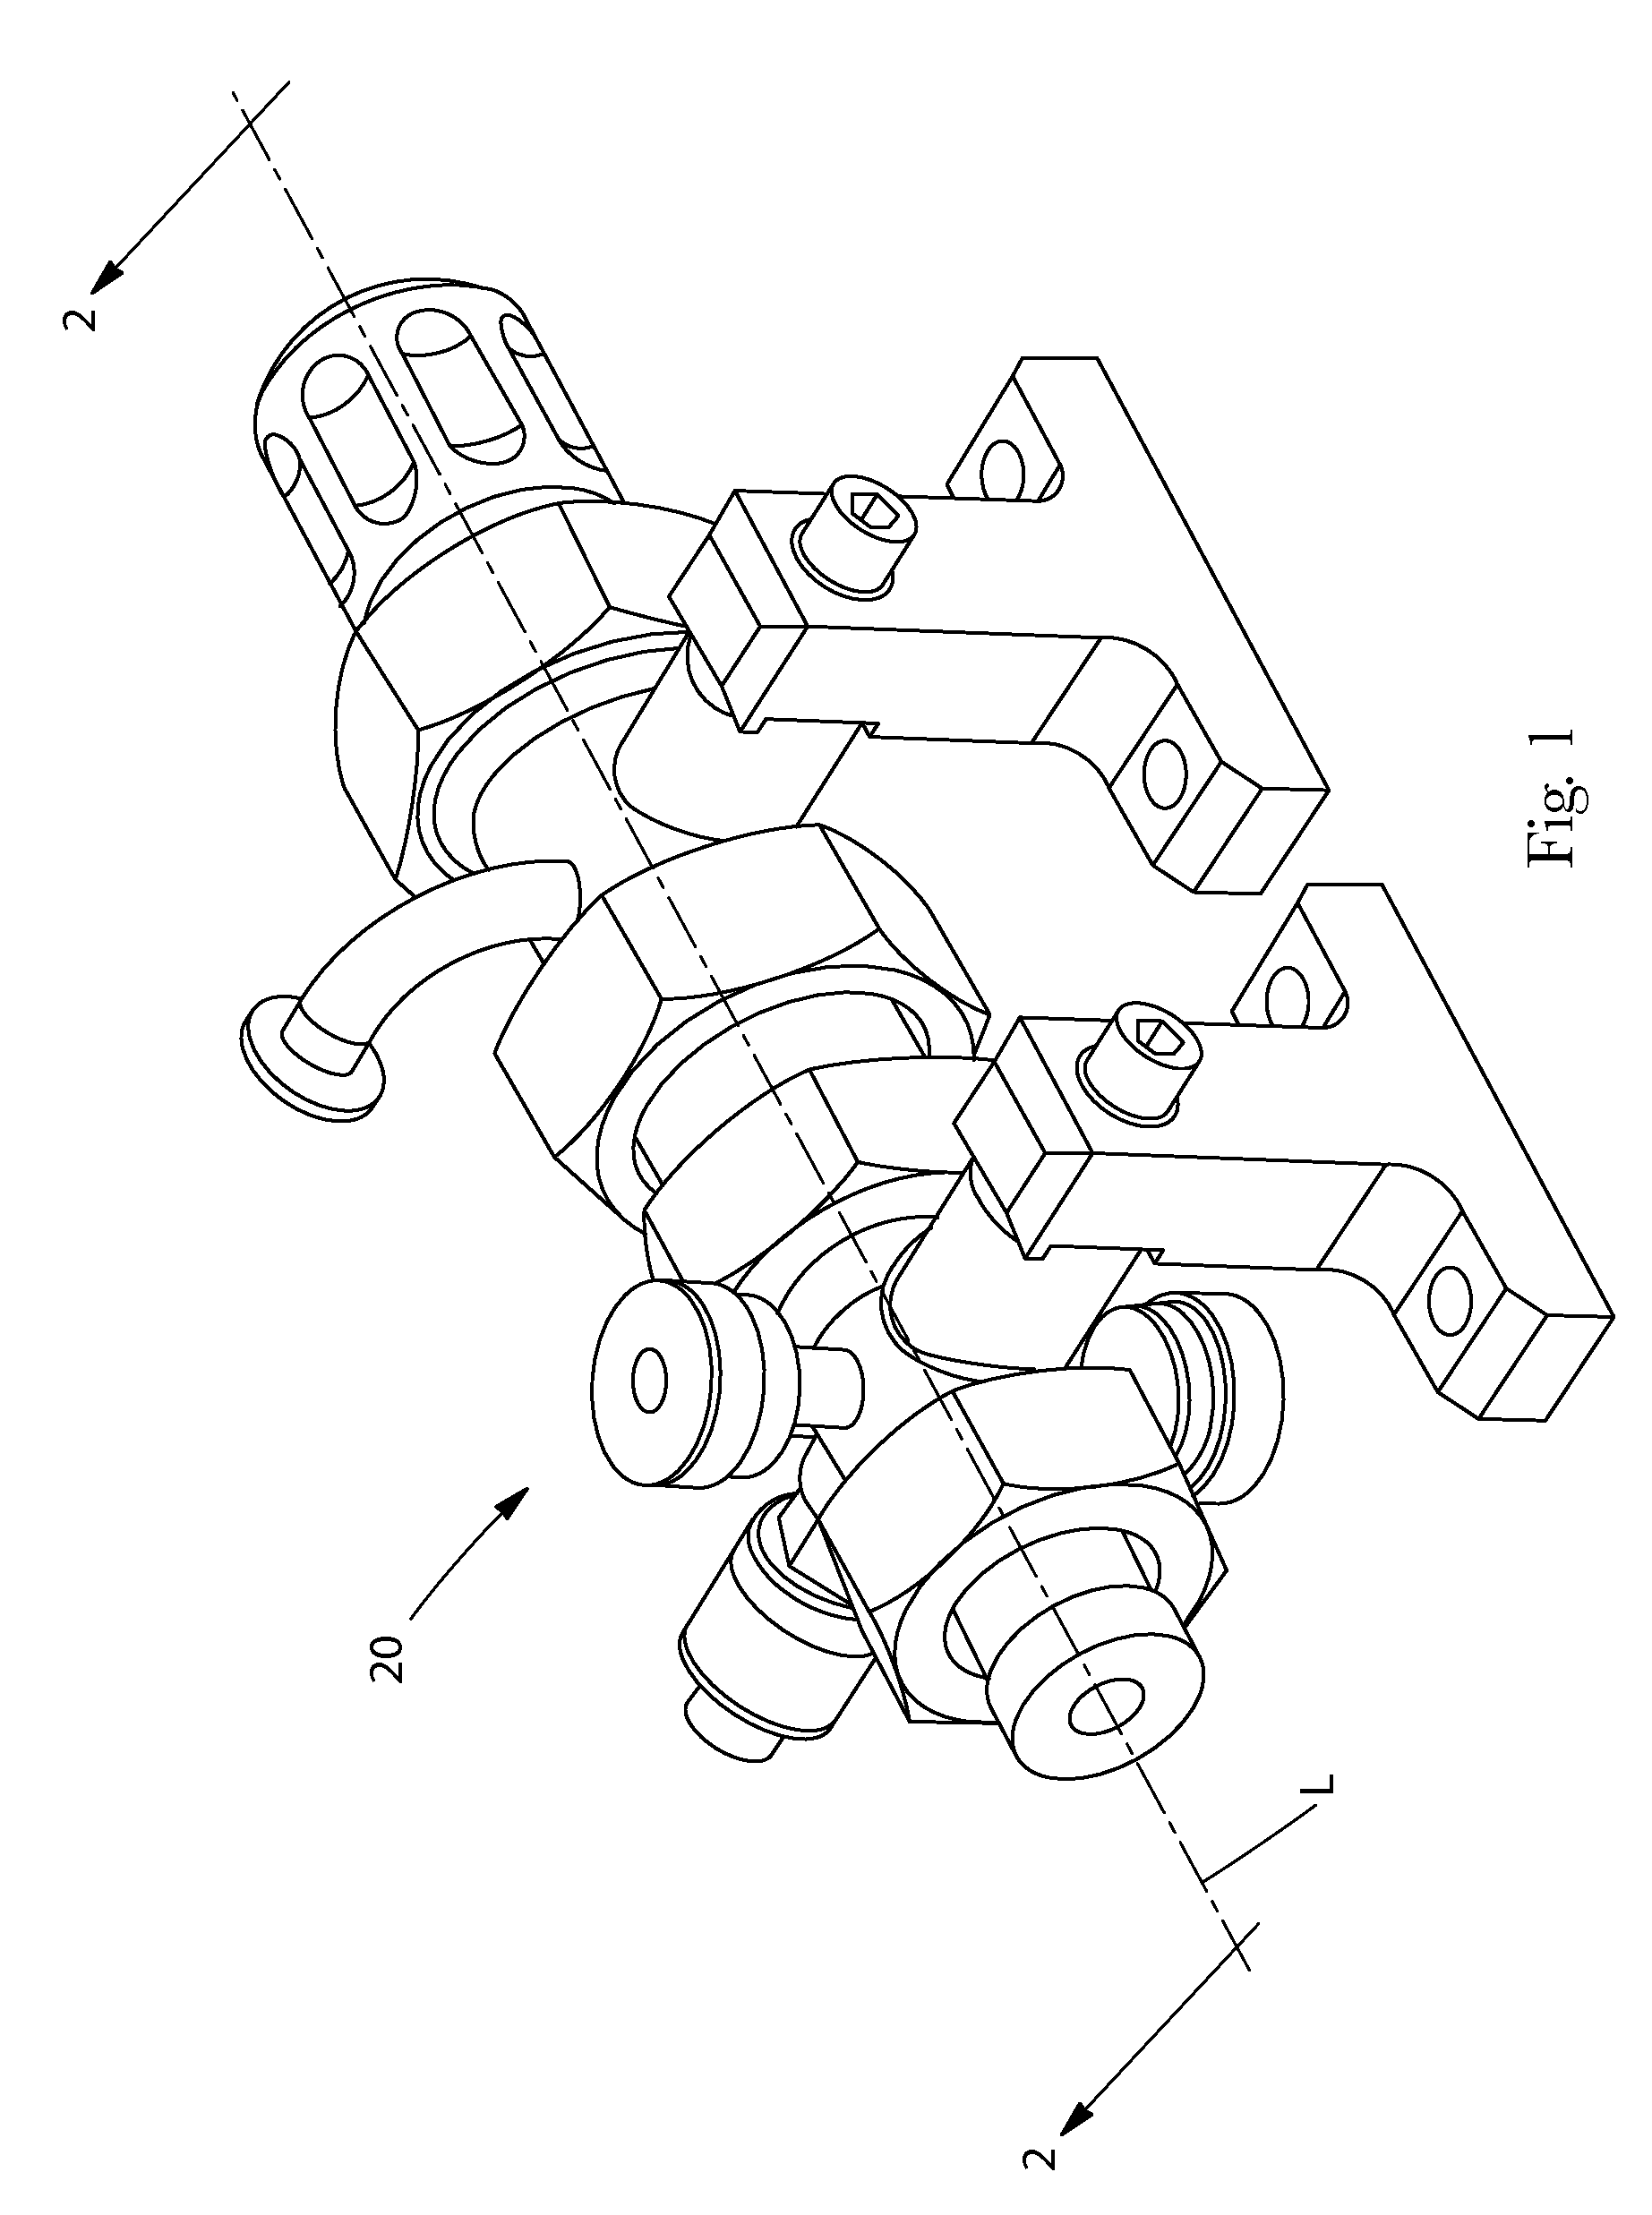 Apparatus and method for mixing by producing shear and/or cavitation, and components for apparatus